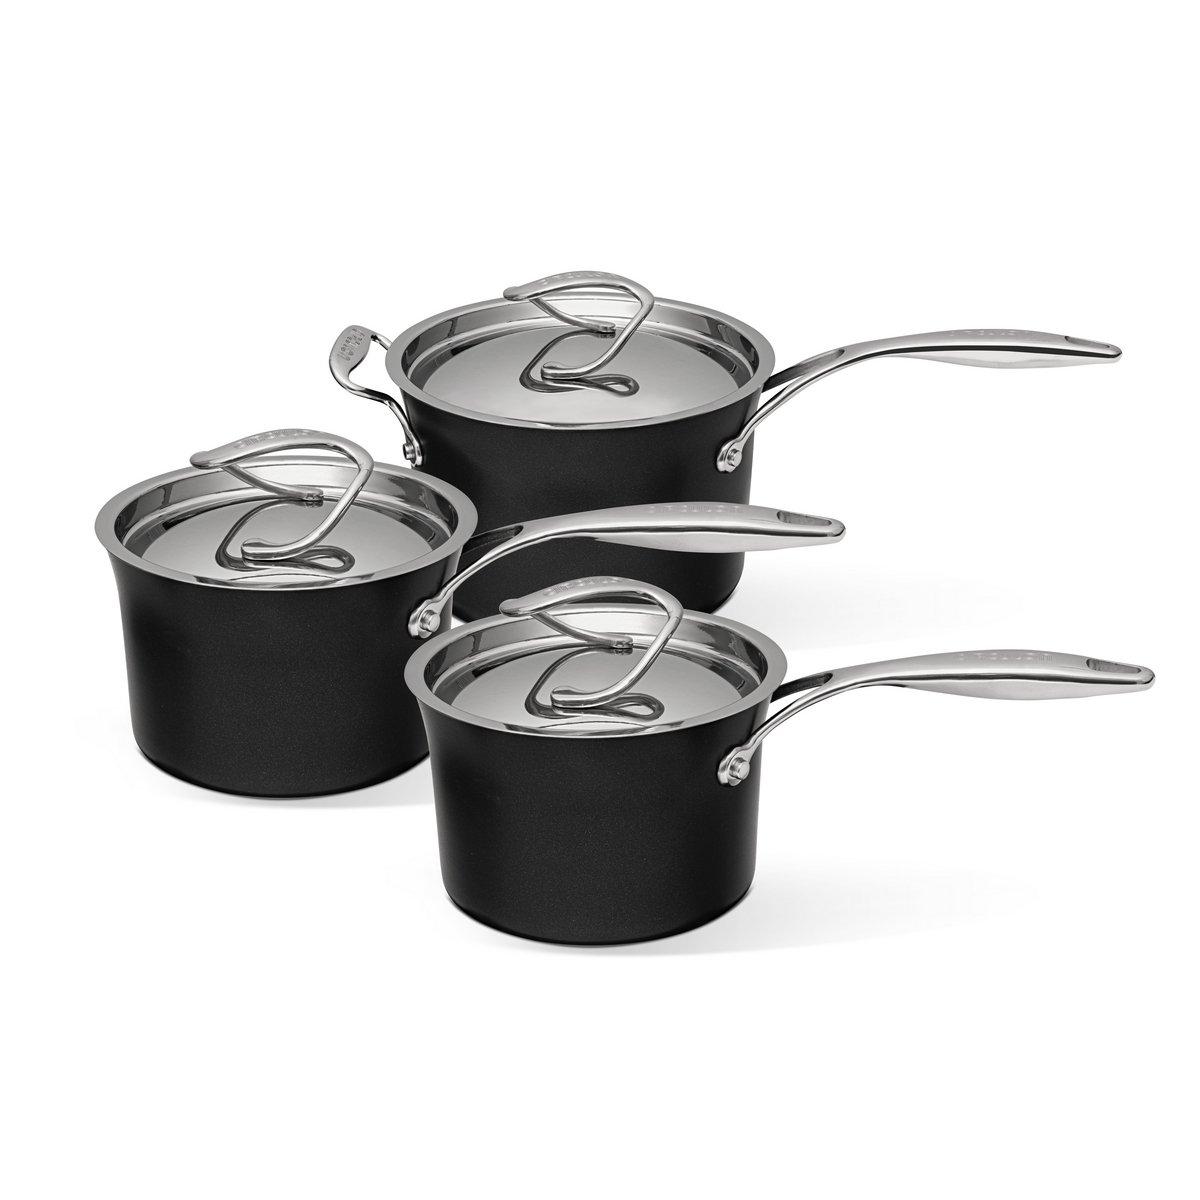 Style Anodized Saucepan Set - Small, Medium & Large Size - Pack of 3